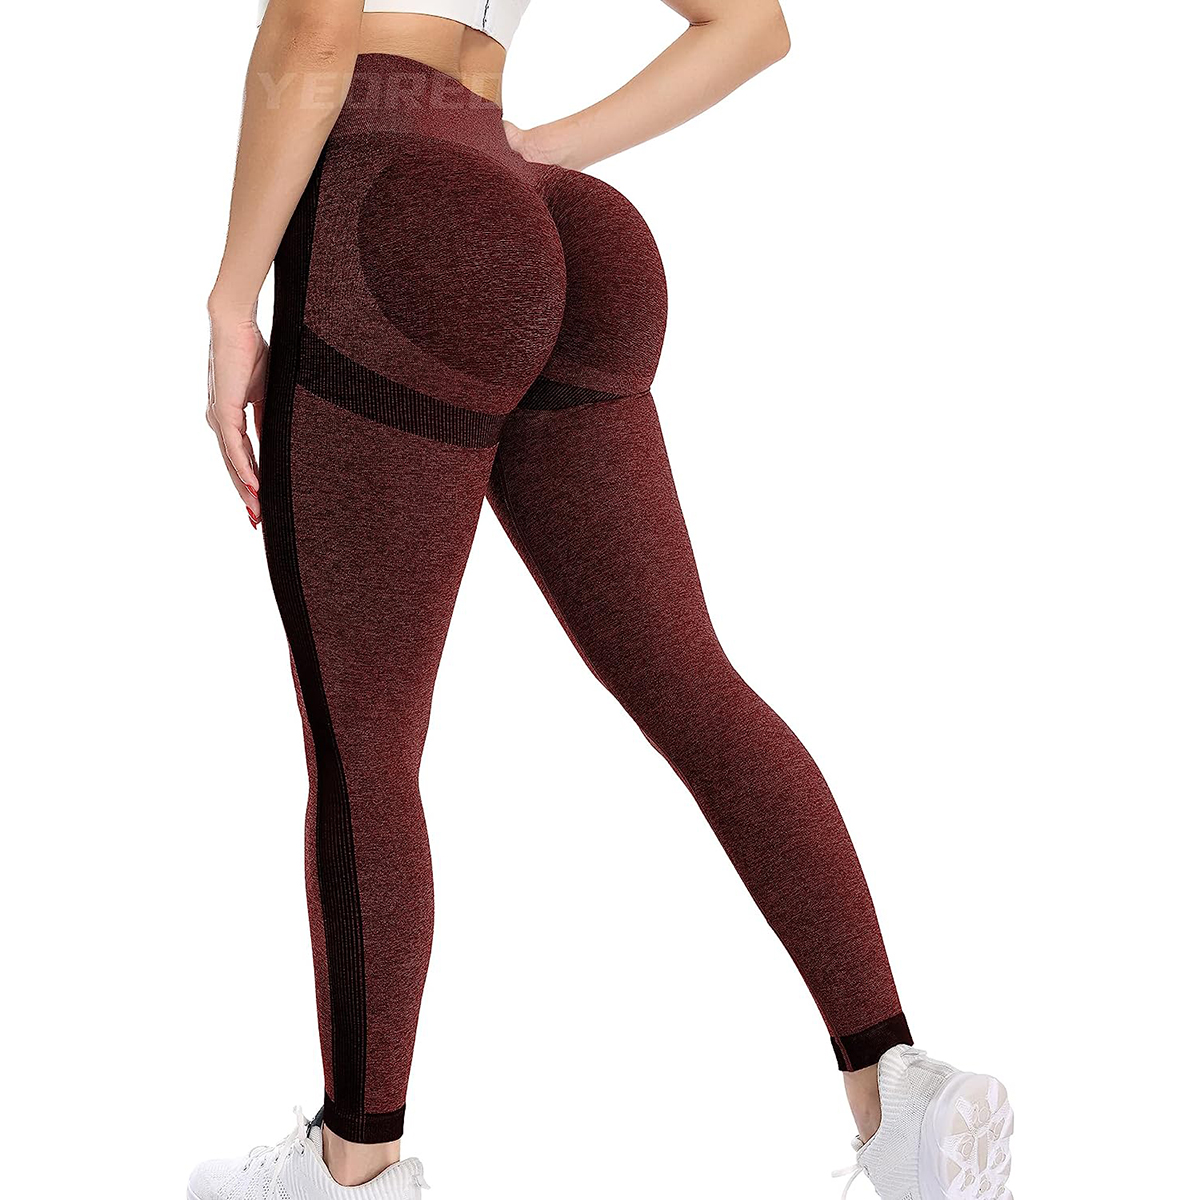 Shascullfites Melody High Waisted Compression Leggings Women Fitness Best  Workout Scrunch Bum Lifted Leggings Push Up Leggings - AliExpress